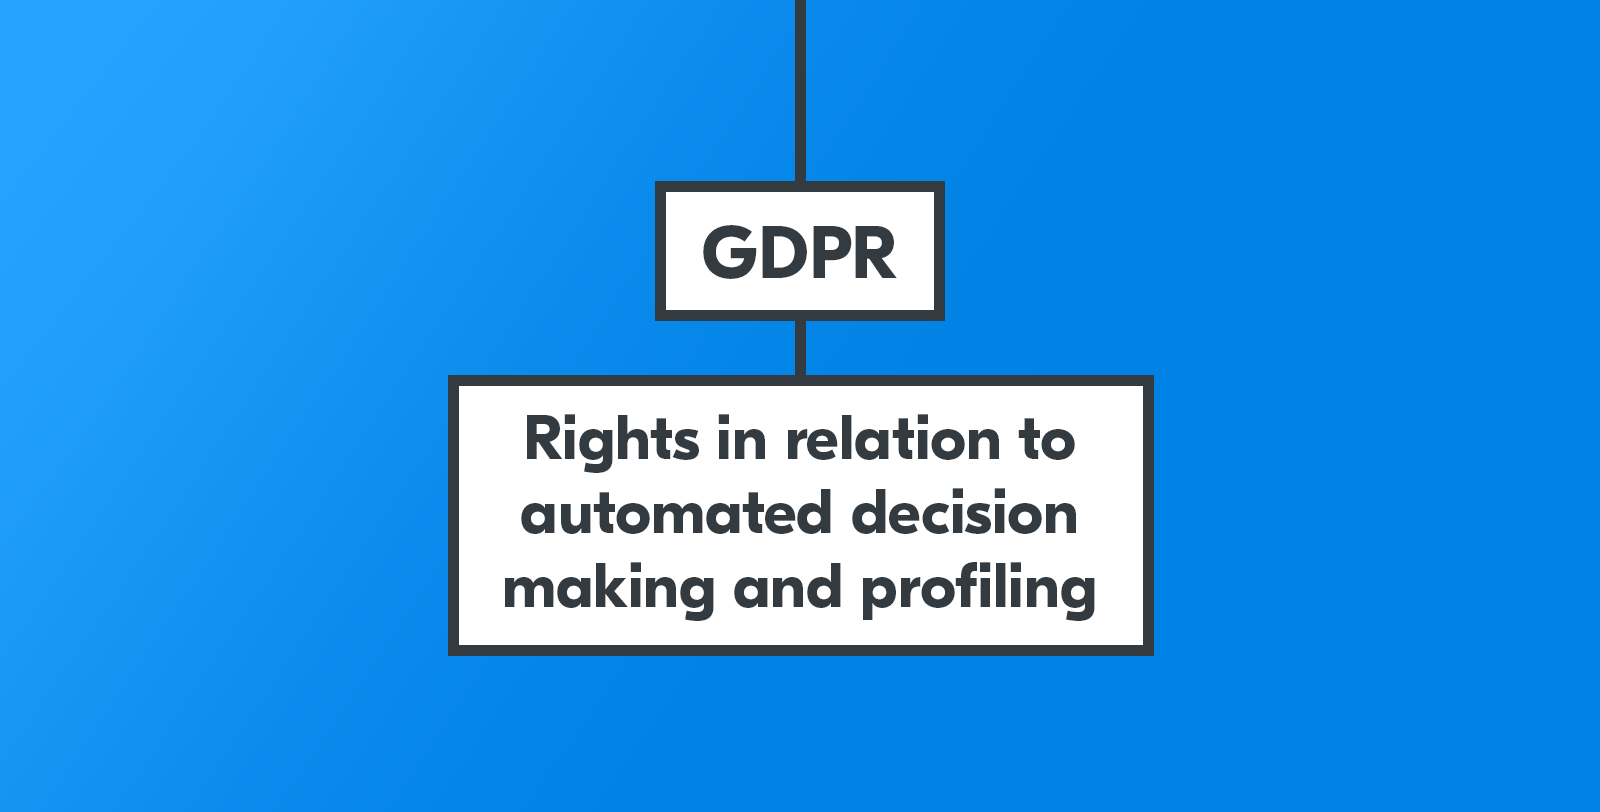 Getting to grips with GDPR: Rights in relation to automated decision making and profiling